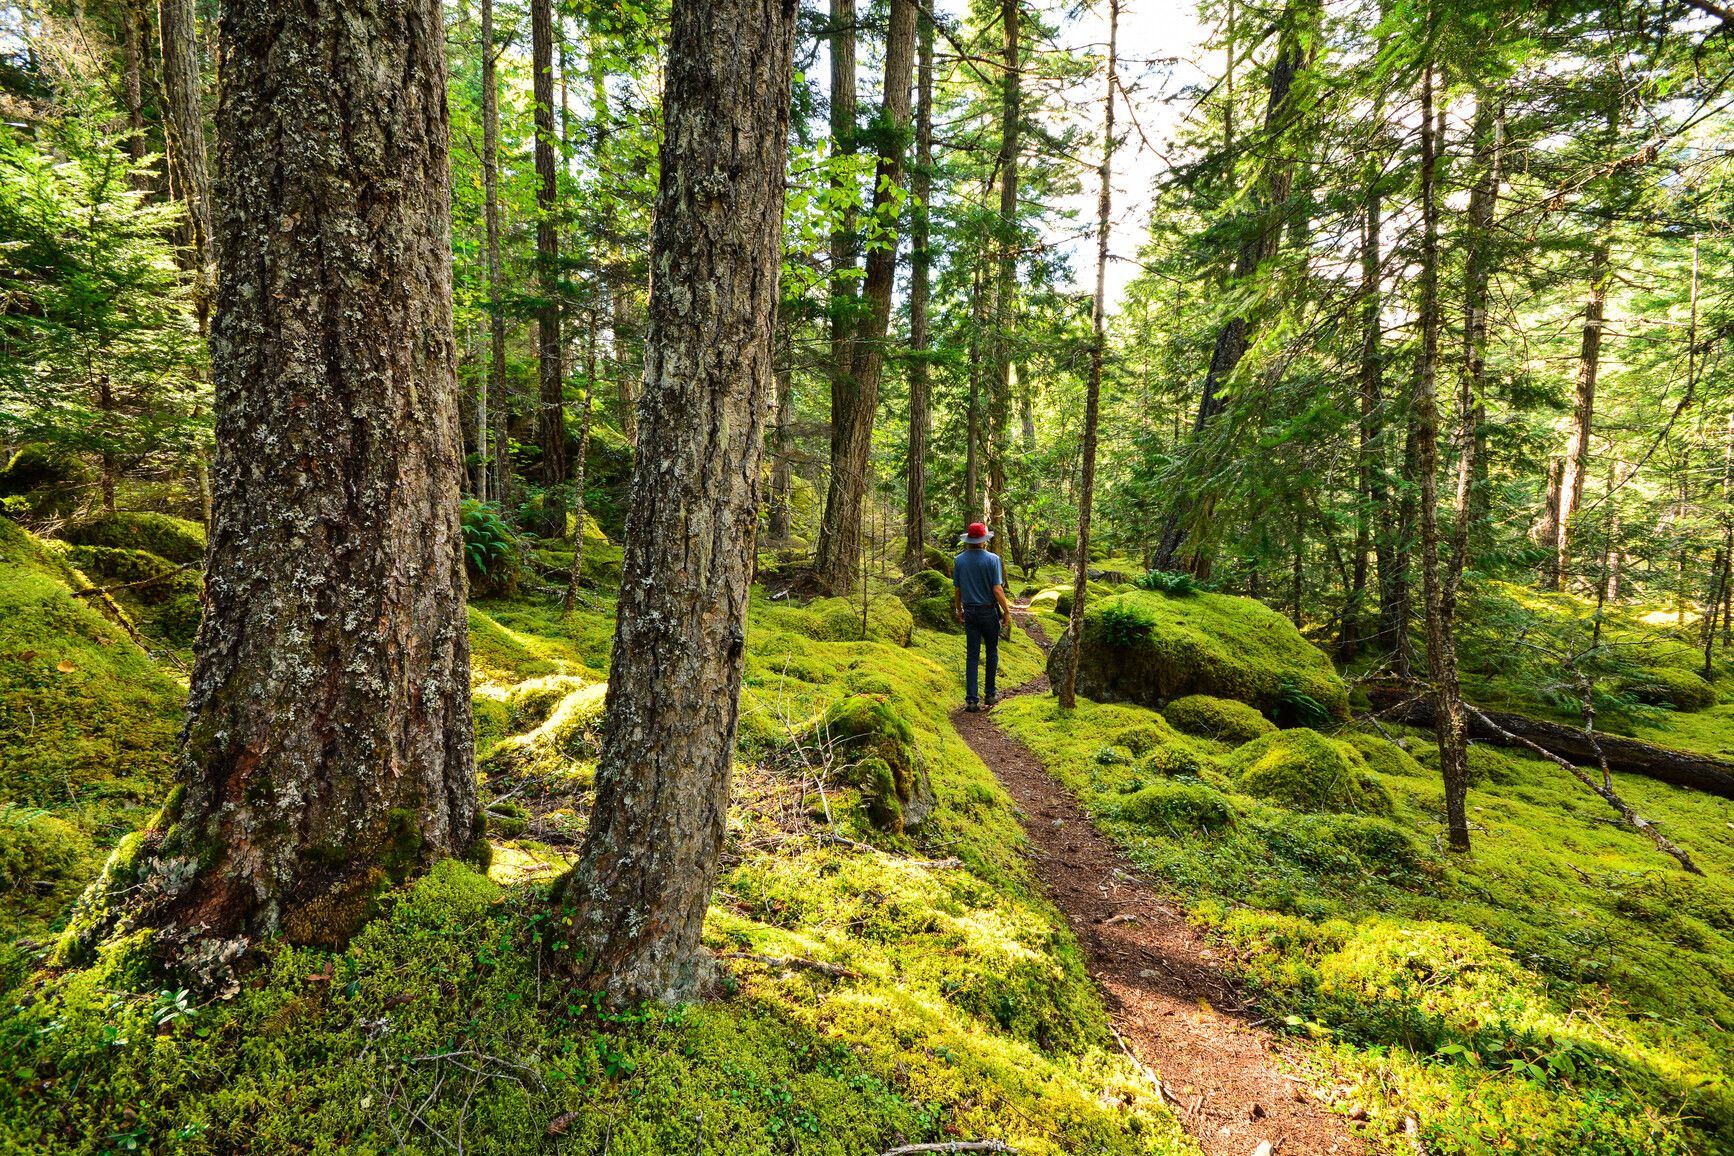 A park visitor on a forest trail in Tweedsmuir Park. Thick moss covers the forest floor.